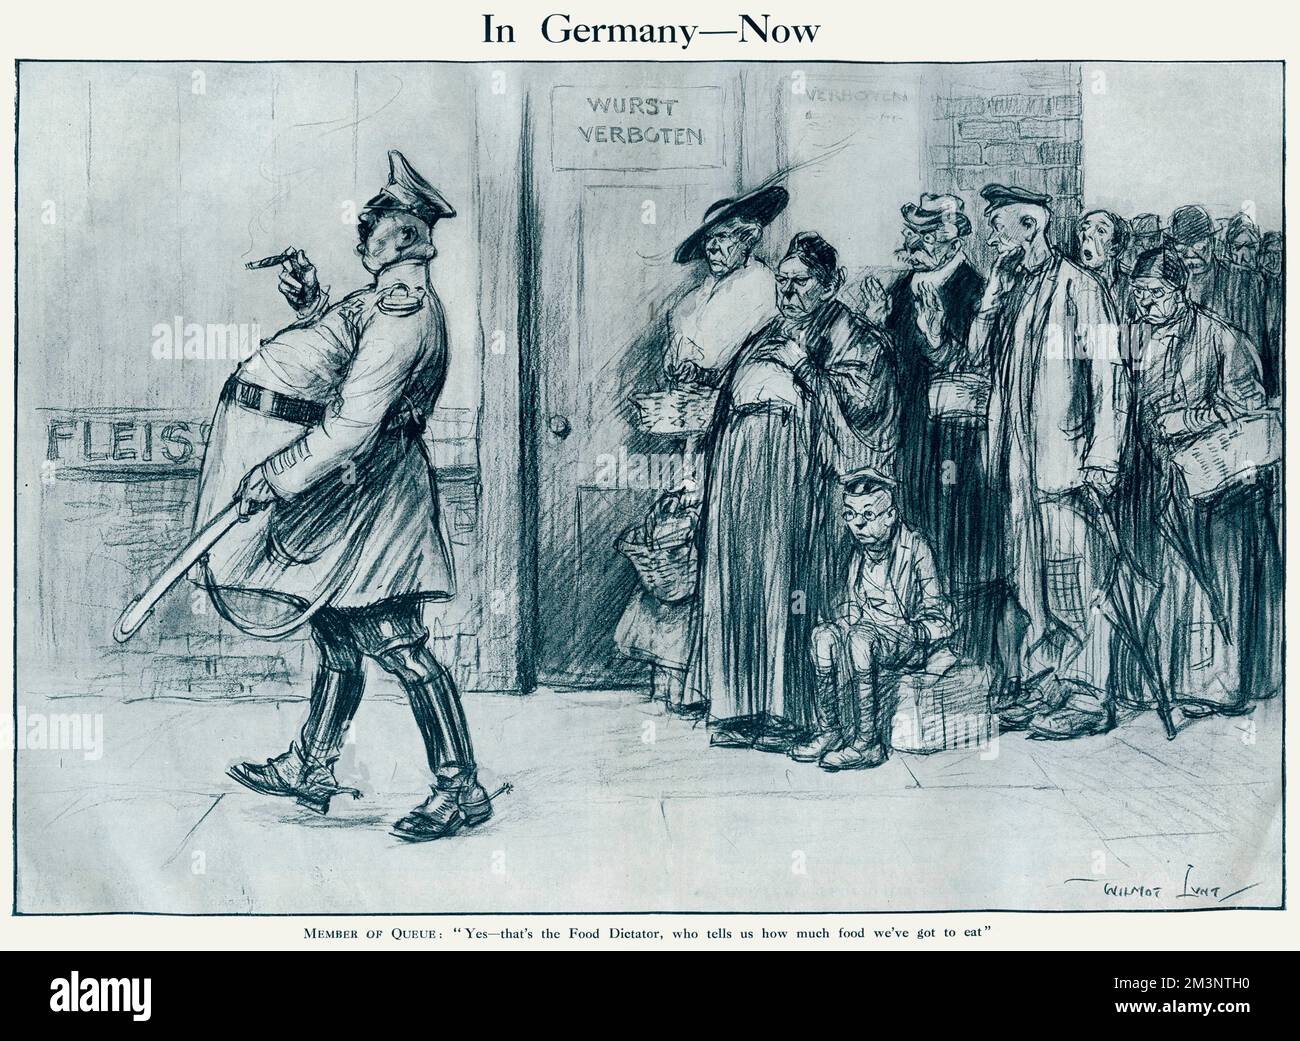 'In Germany -Now'  Caption: Member of the queue: &quot;Yes -that's the Food Dictator who tells us how much we've got to eat&quot;  By 1917, the German population was beginning to feel the pinch. Whereas the British had managed to survive the U-boat blockade by organising their merchant fleet into convoys, the Allied blockade of Germany had been ruthlessly effective, and the country came close to starvation. The situation was no better for the German army when no meat or fresh produce was available. Hunger in Germany was certainly a deciding factor in the eventual Allied victory and this Stock Photo